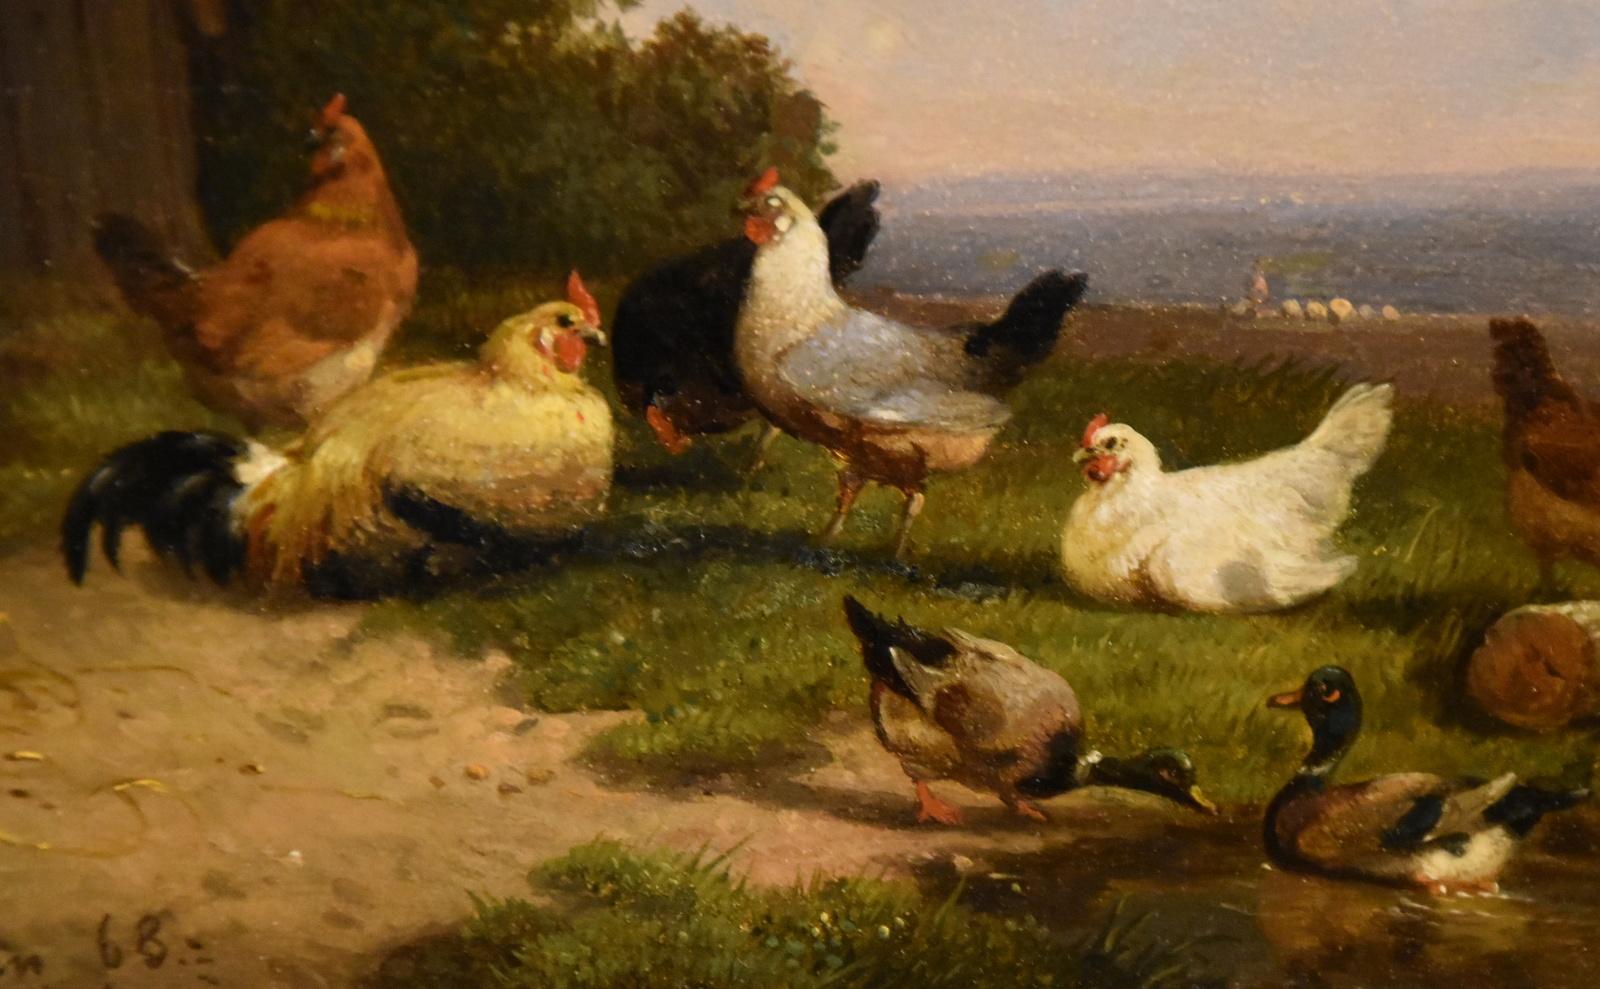 Oil Painting by Cornelius Van Leemputten “Chickens in Landscape”. Cornelius van Leemputten 1841-1902Painter of low countries scenes, cattle, sheep and primarily poultry. From a large family of painters. Oil on panel . Signed and dated